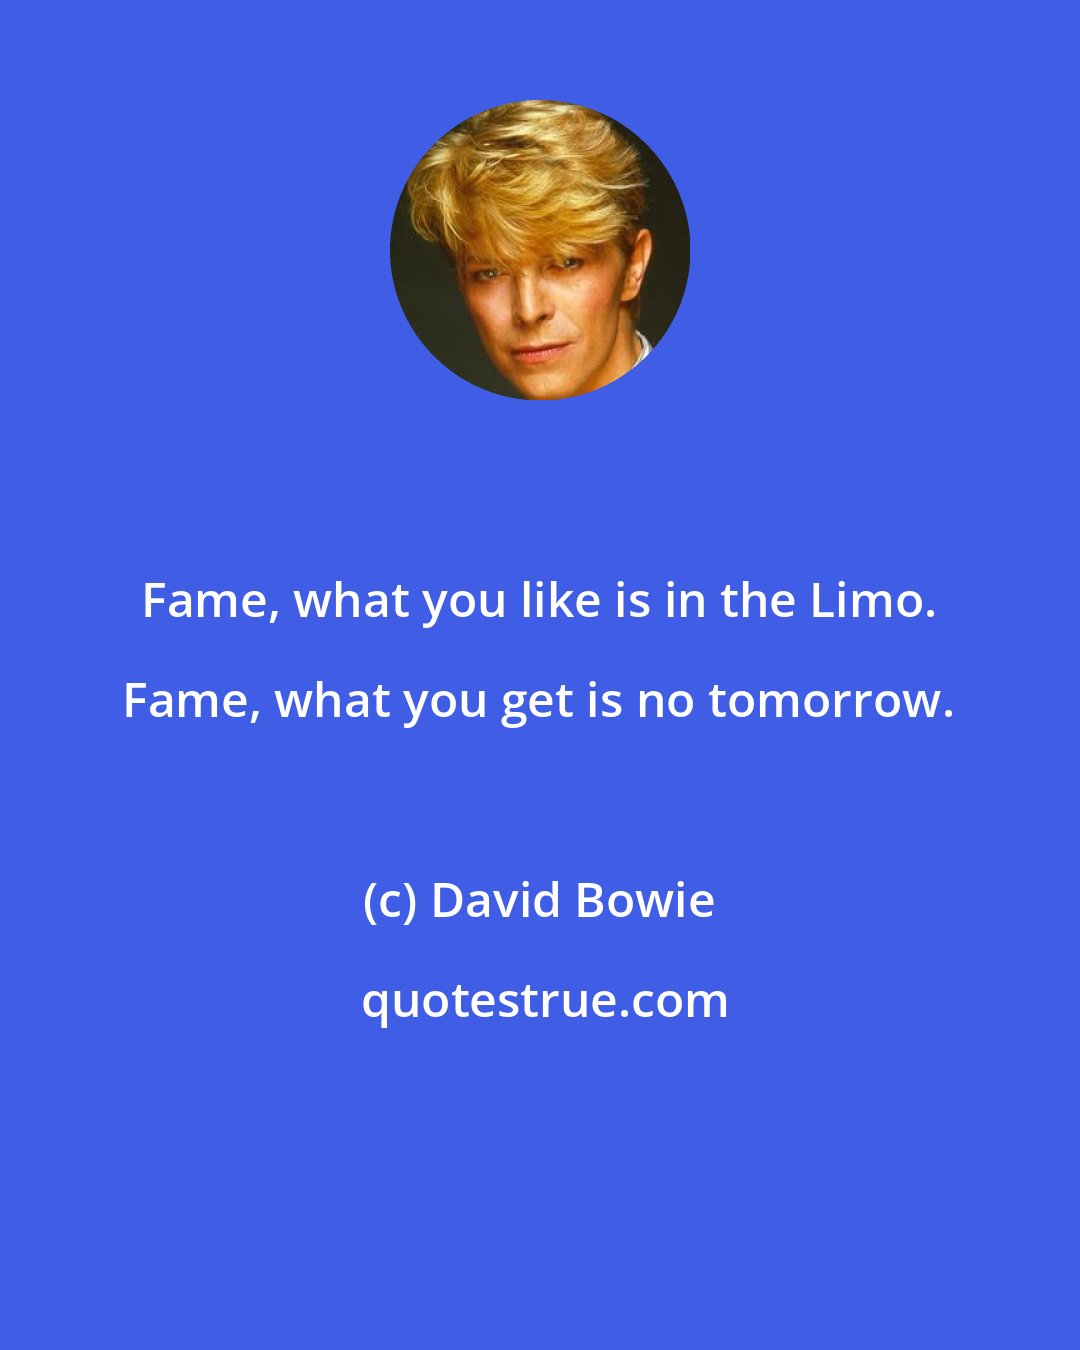 David Bowie: Fame, what you like is in the Limo. Fame, what you get is no tomorrow.